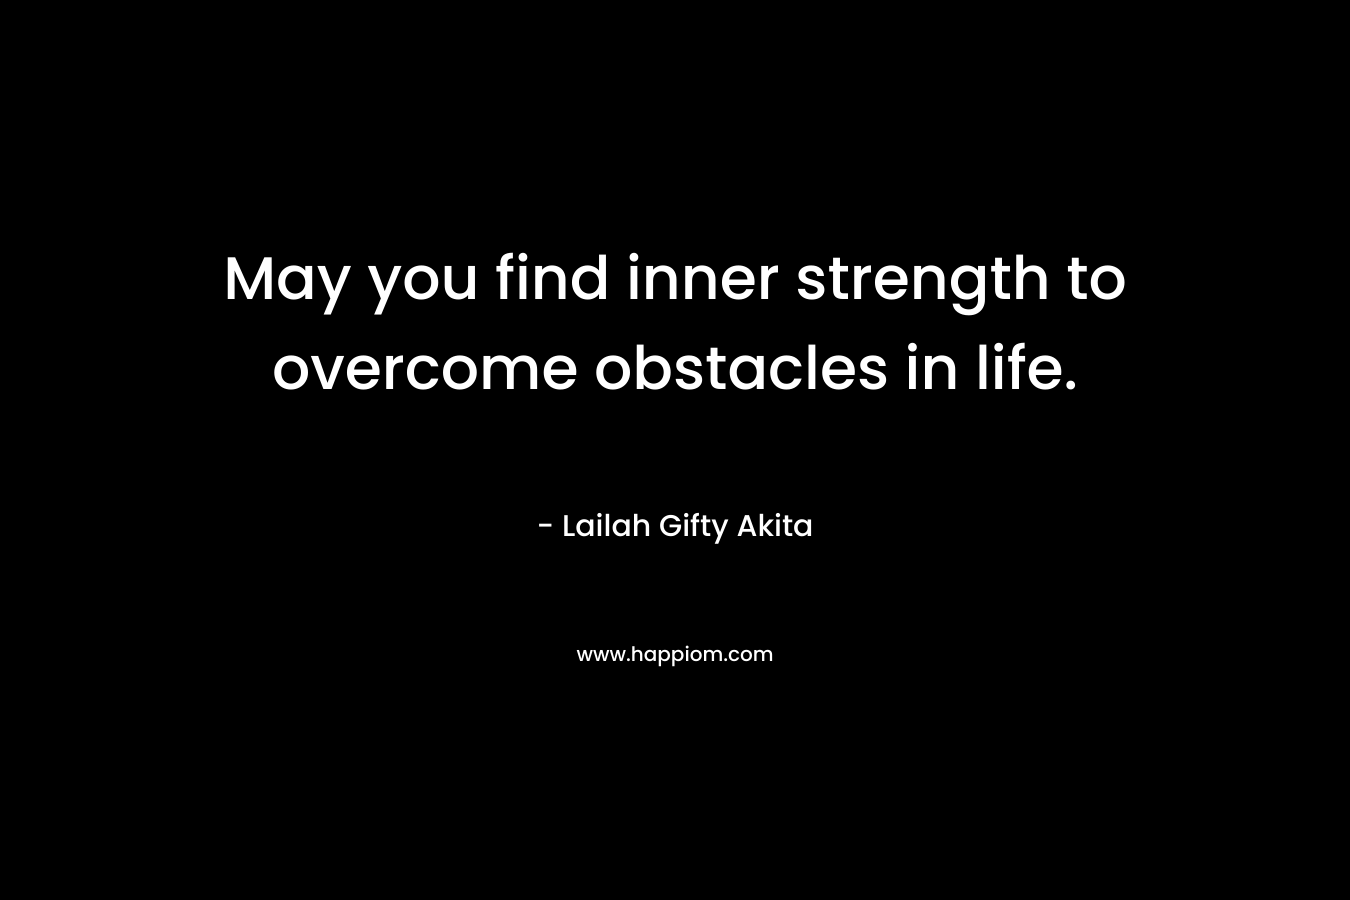 May you find inner strength to overcome obstacles in life.